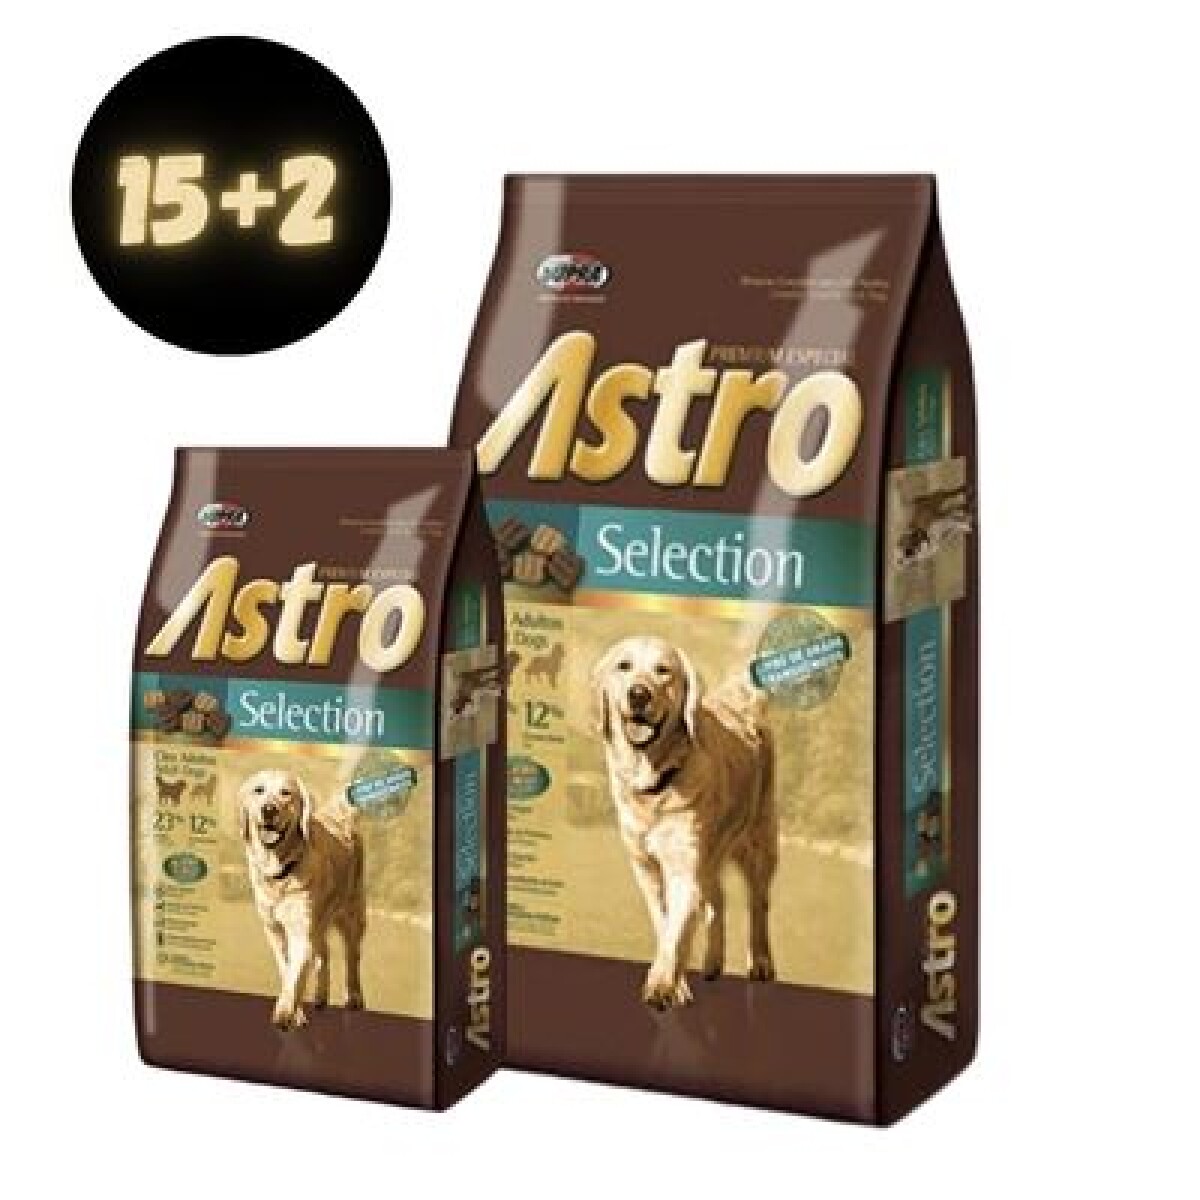 ASTRO SELECTION 15+2 KG - Unica 